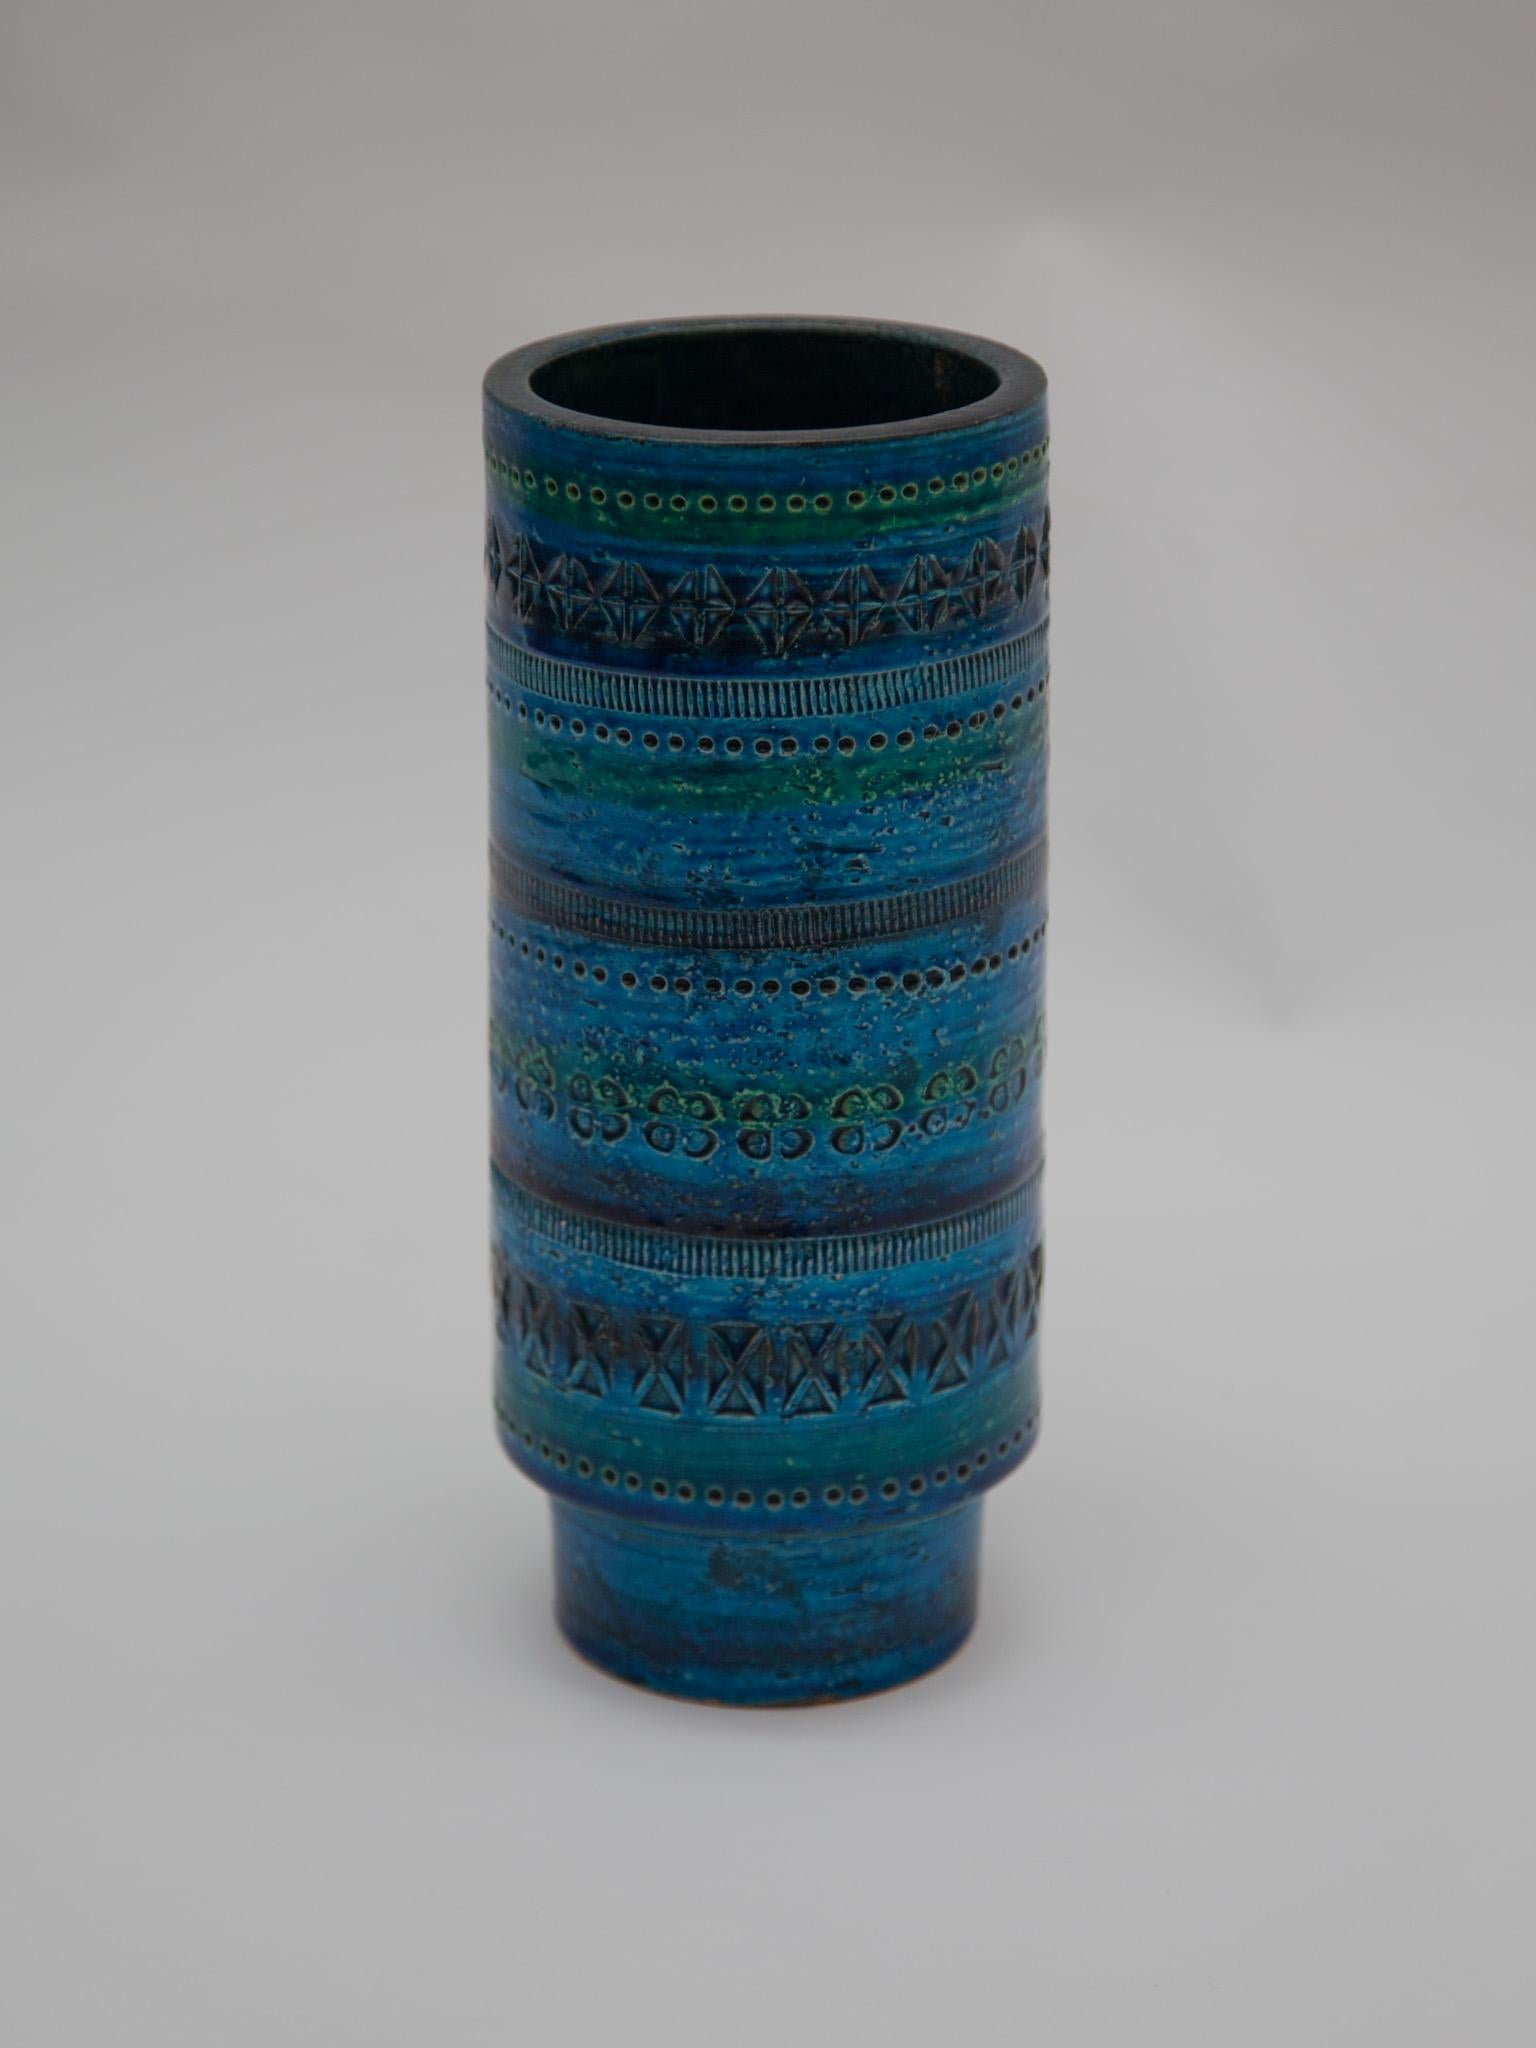 Mid-Century Modern blue glazed ceramic round vase, Italy, 1950-1960s. Designed by Aldo Londi and manufactured by Bitossi. Handcrafted in Italy with hand carved geometric design in a glazed vibrant turquoise and cobalt blue.  Lovely to be used as